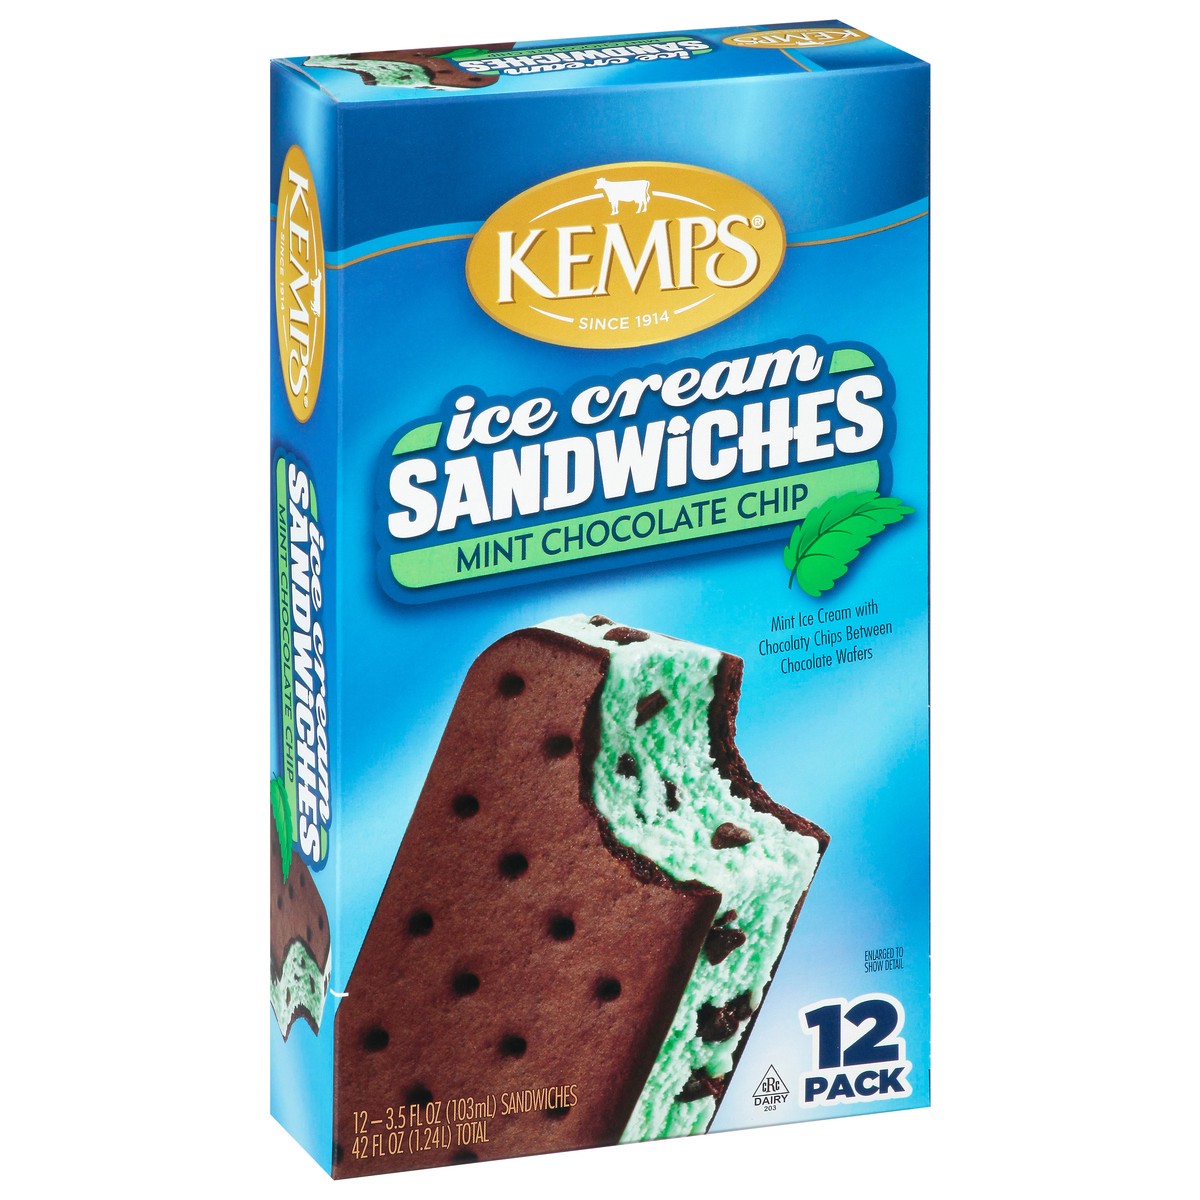 slide 13 of 14, Kemps Mint Chocolate Chip Ice Cream Sandwiches, 12 ct